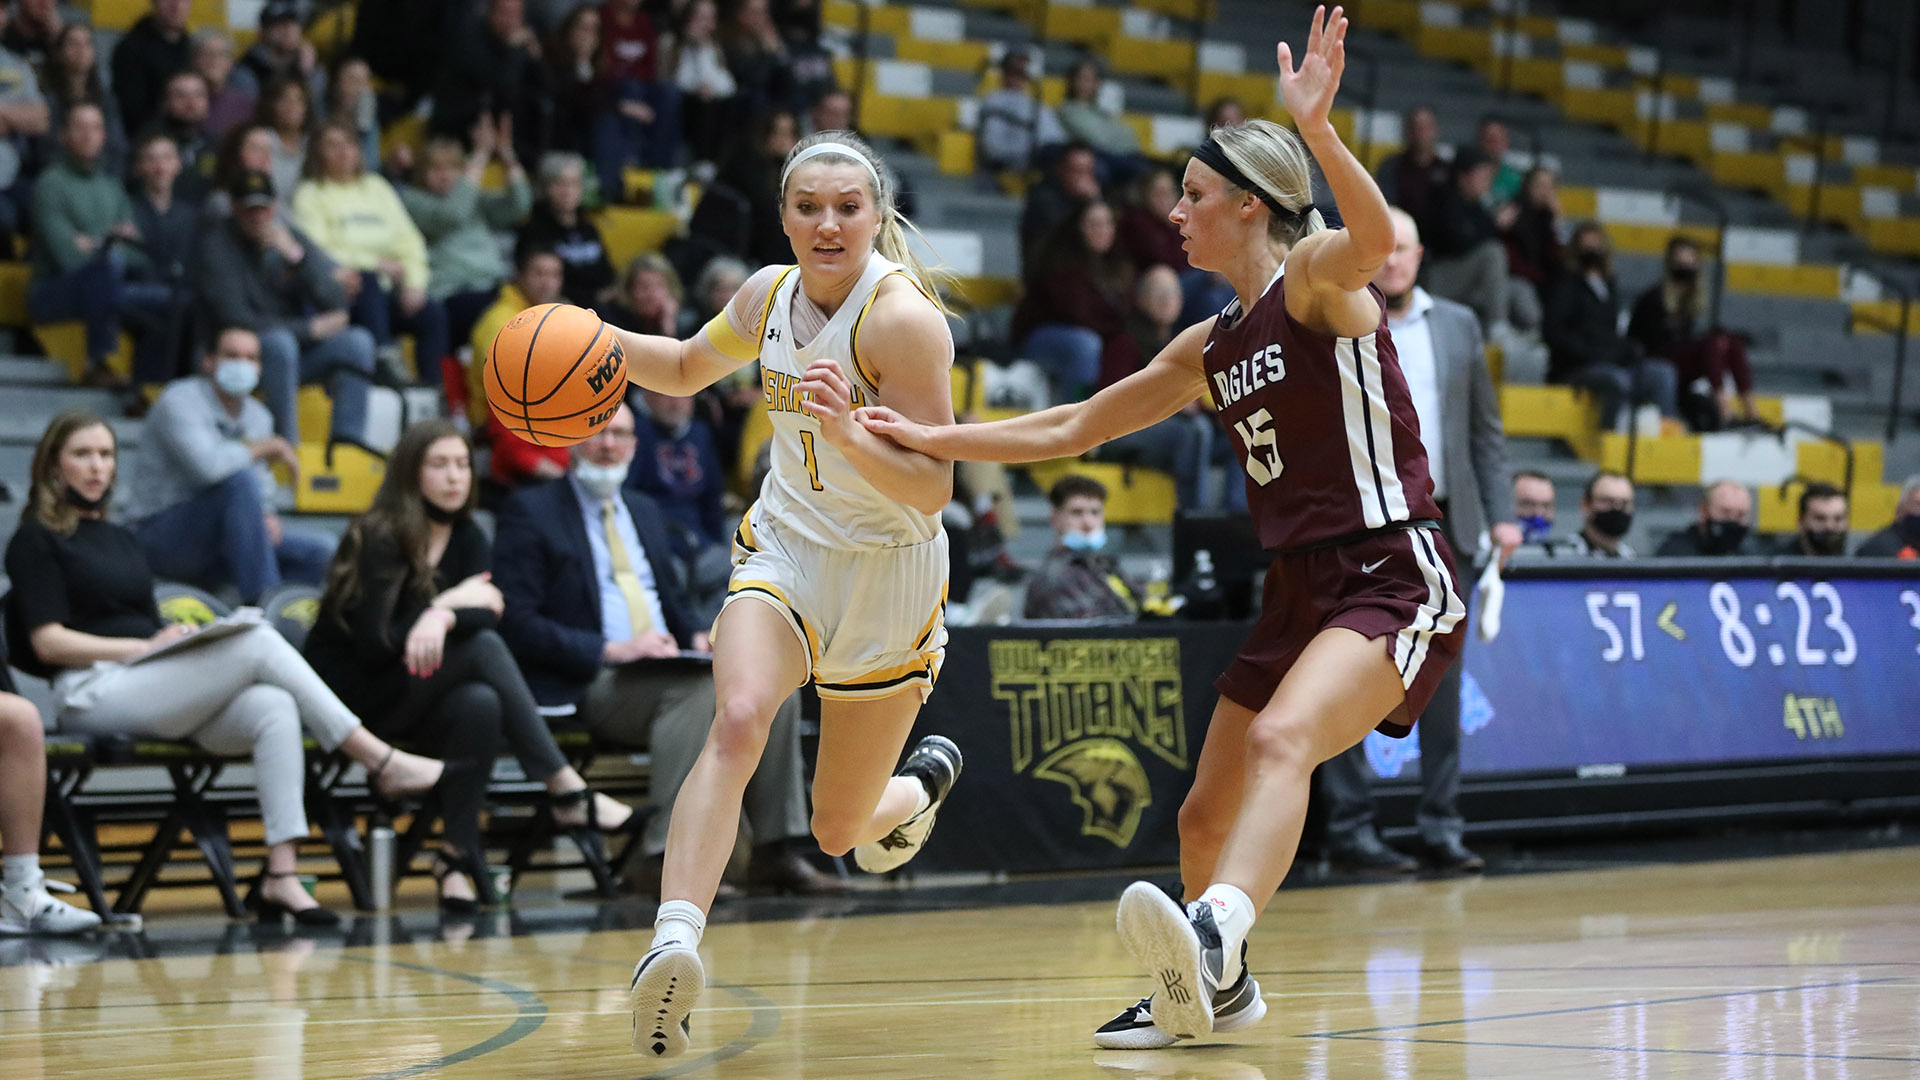 Julia Silloway counted nine points, five assists, four rebounds and two steals against the Eagles.